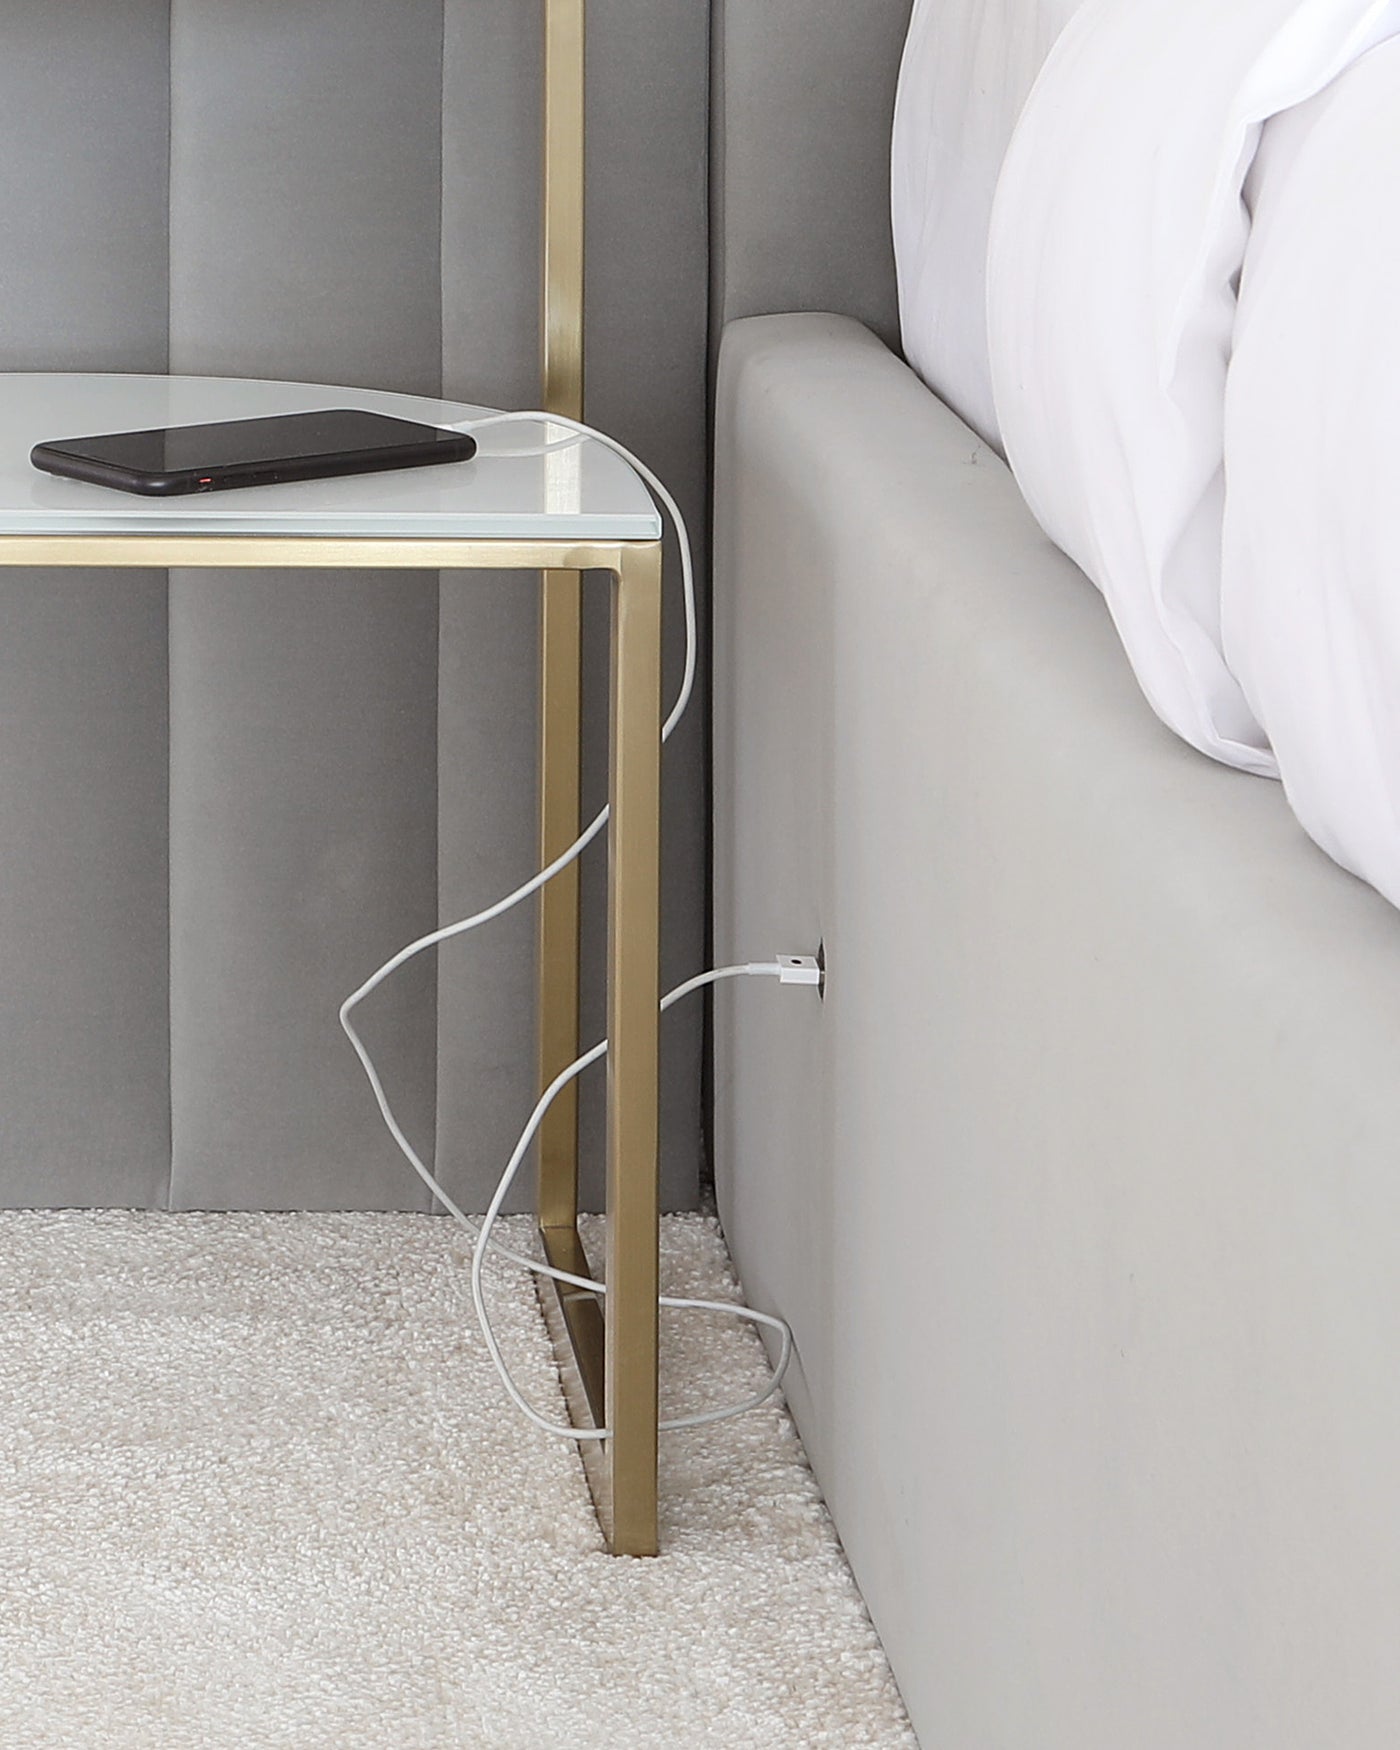 Elegant modern bedside table with a clear glass top and minimalist gold-tone metal frame, alongside a plush grey upholstered bed with crisp white bedding.